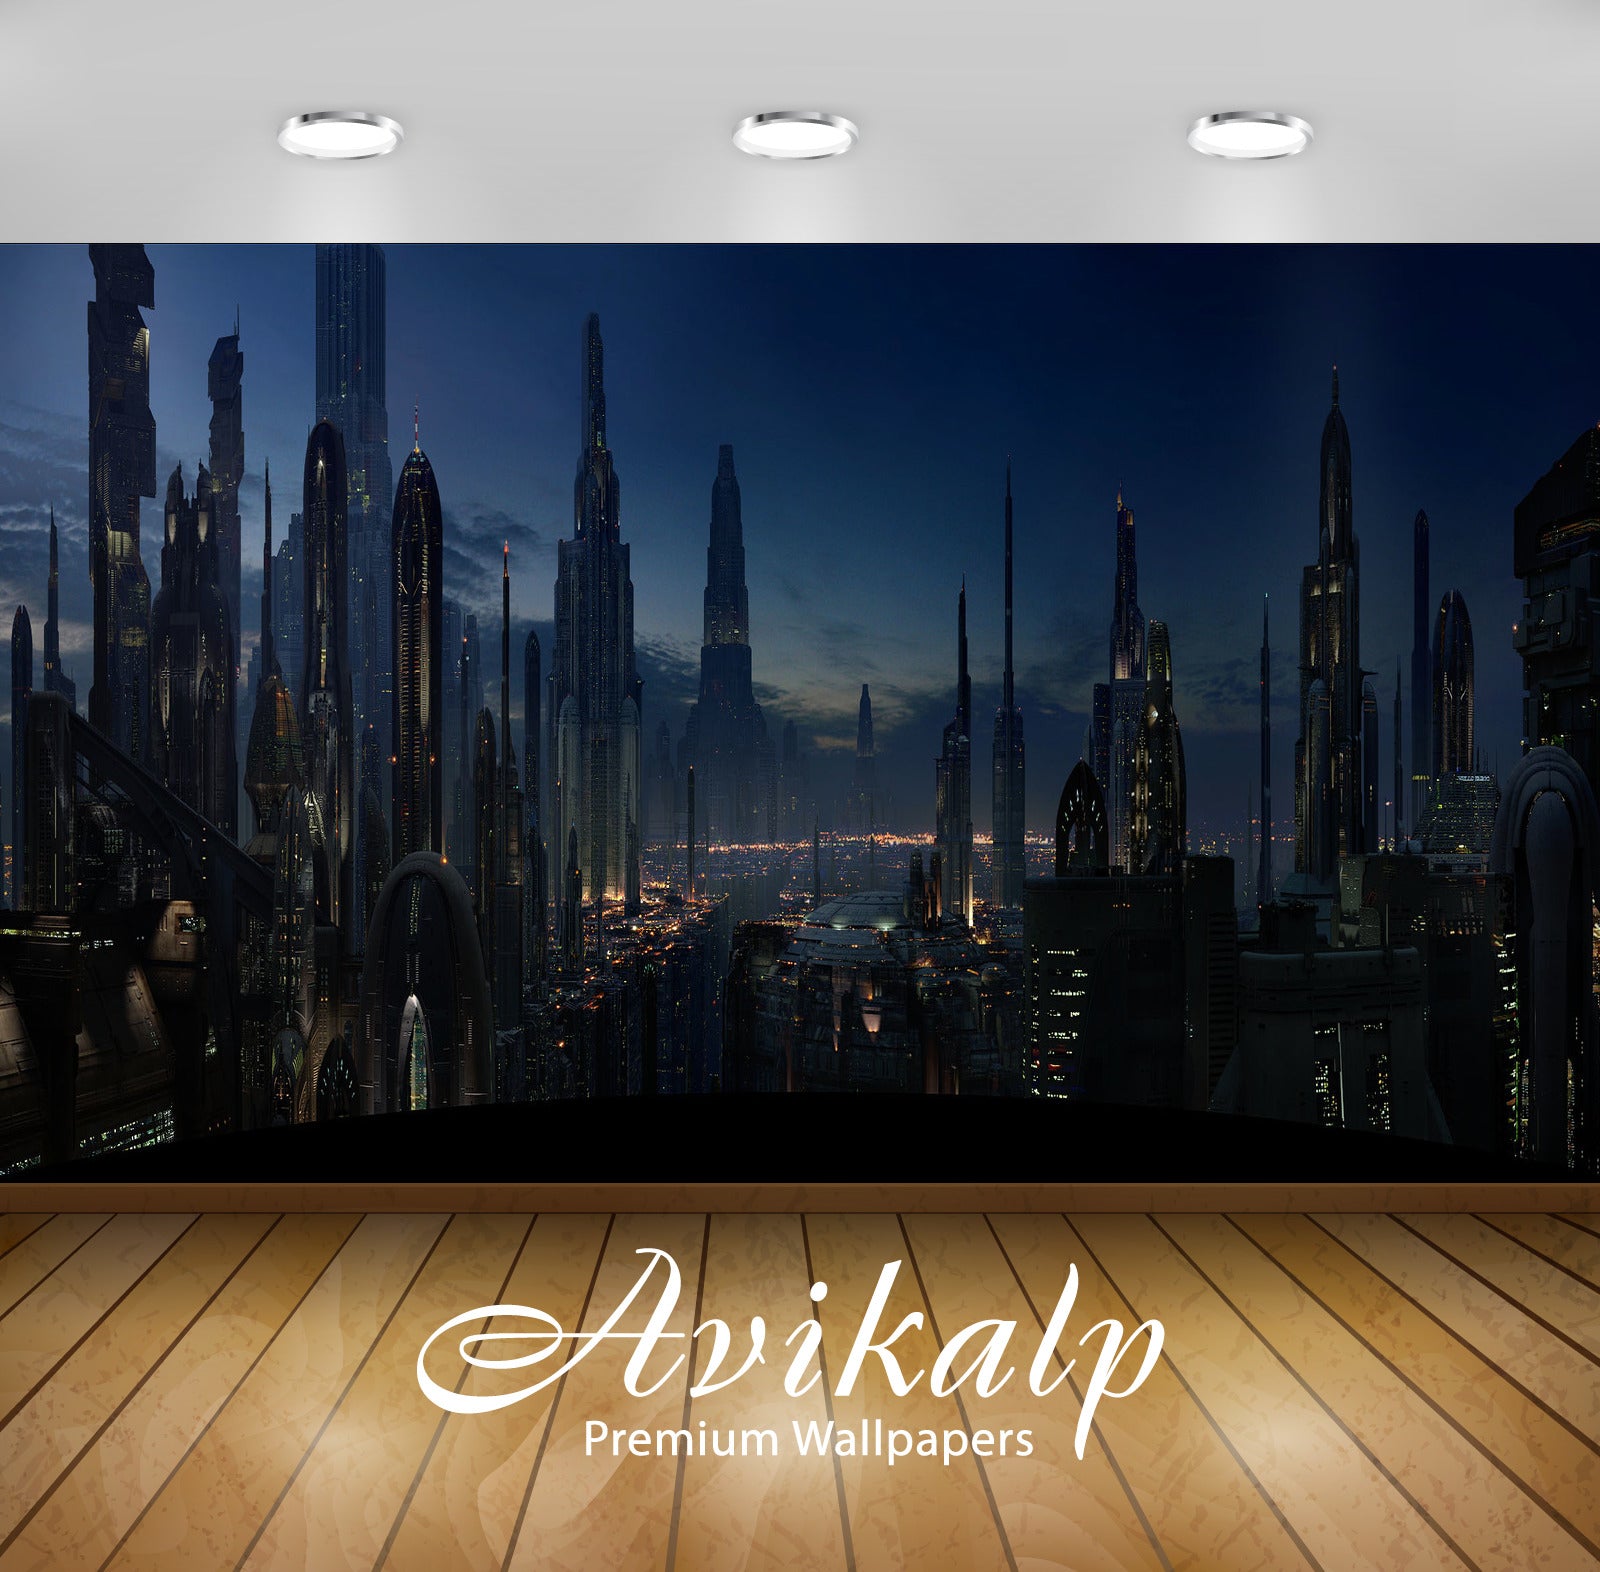 Avikalp Exclusive Awi1638 Star Wars Coruscant Full HD Wallpapers for Living room, Hall, Kids Room, K